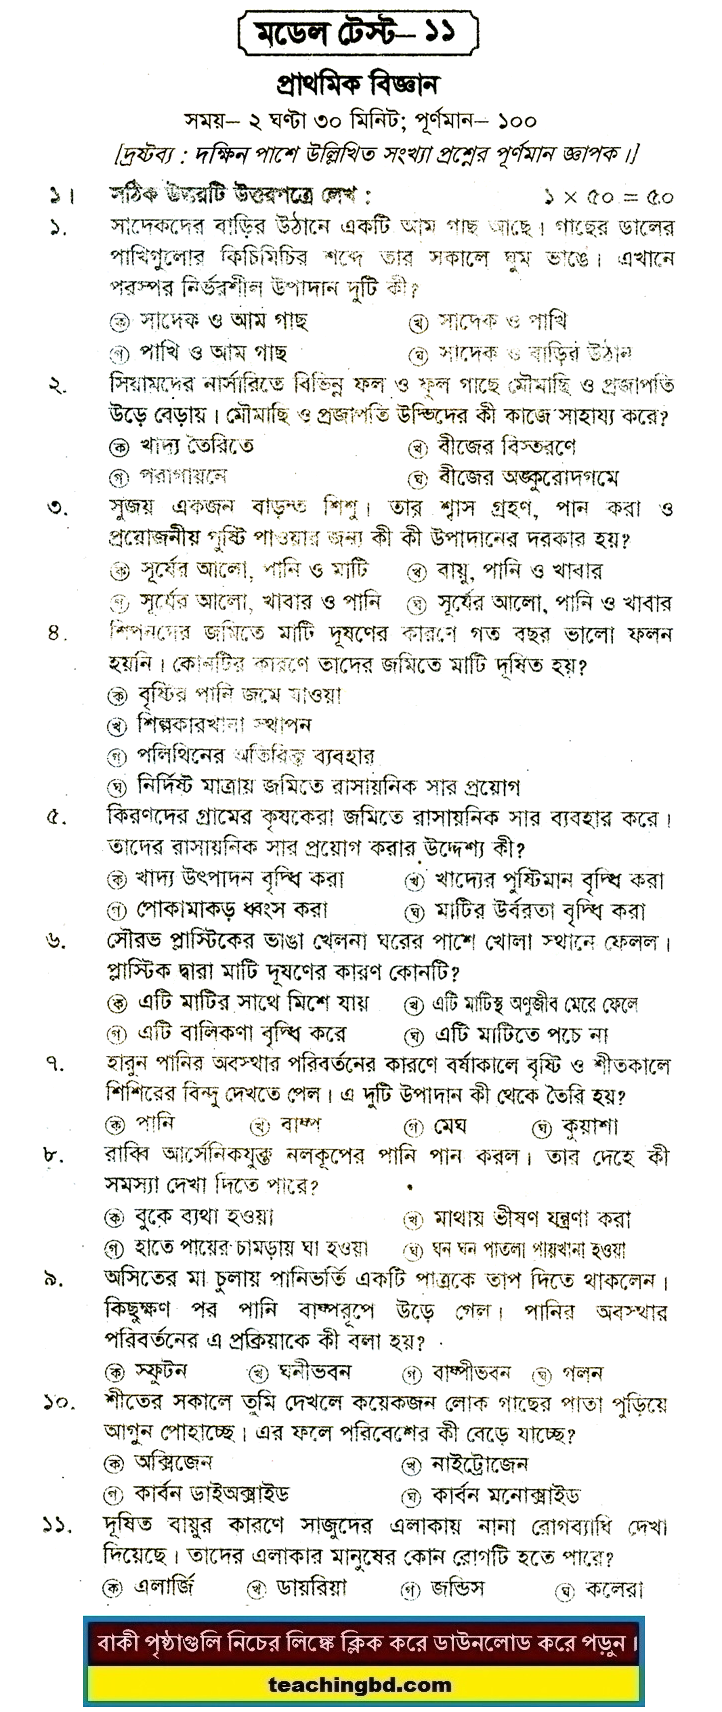 Elementary Science Suggestion and Question Patterns of PEC Examination 2016-11